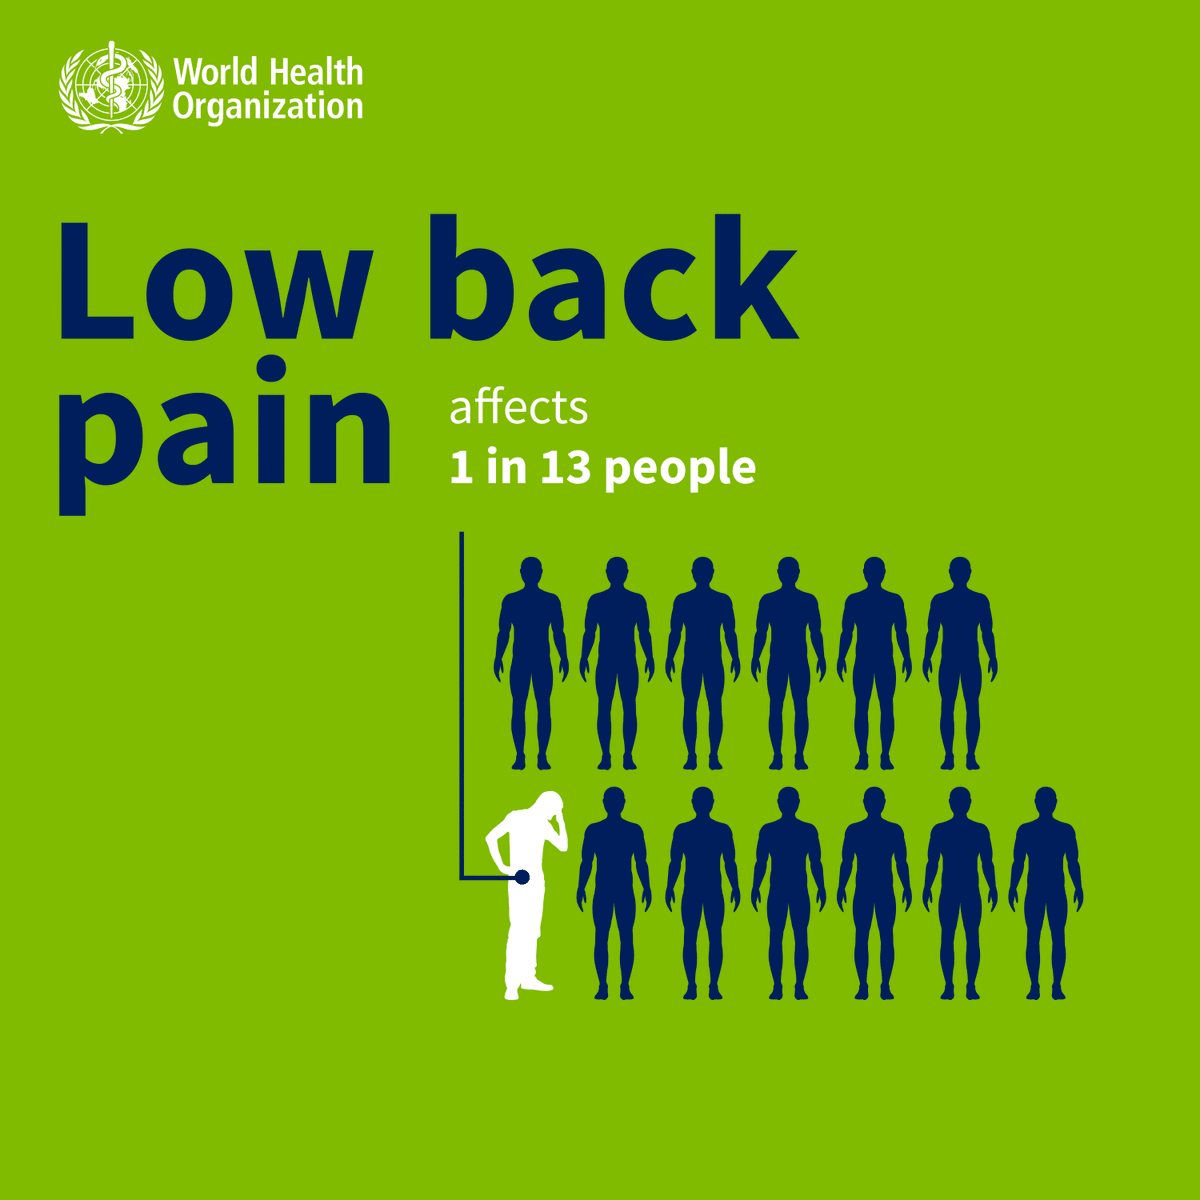 Low back pain affects 1 in 13 people. That’s 619 million people, of all ages, who may benefit from treatment. But so many are missing out on effective care. Our new guideline outlines the best way to manage chronic low back pain in adults, including older people, according to